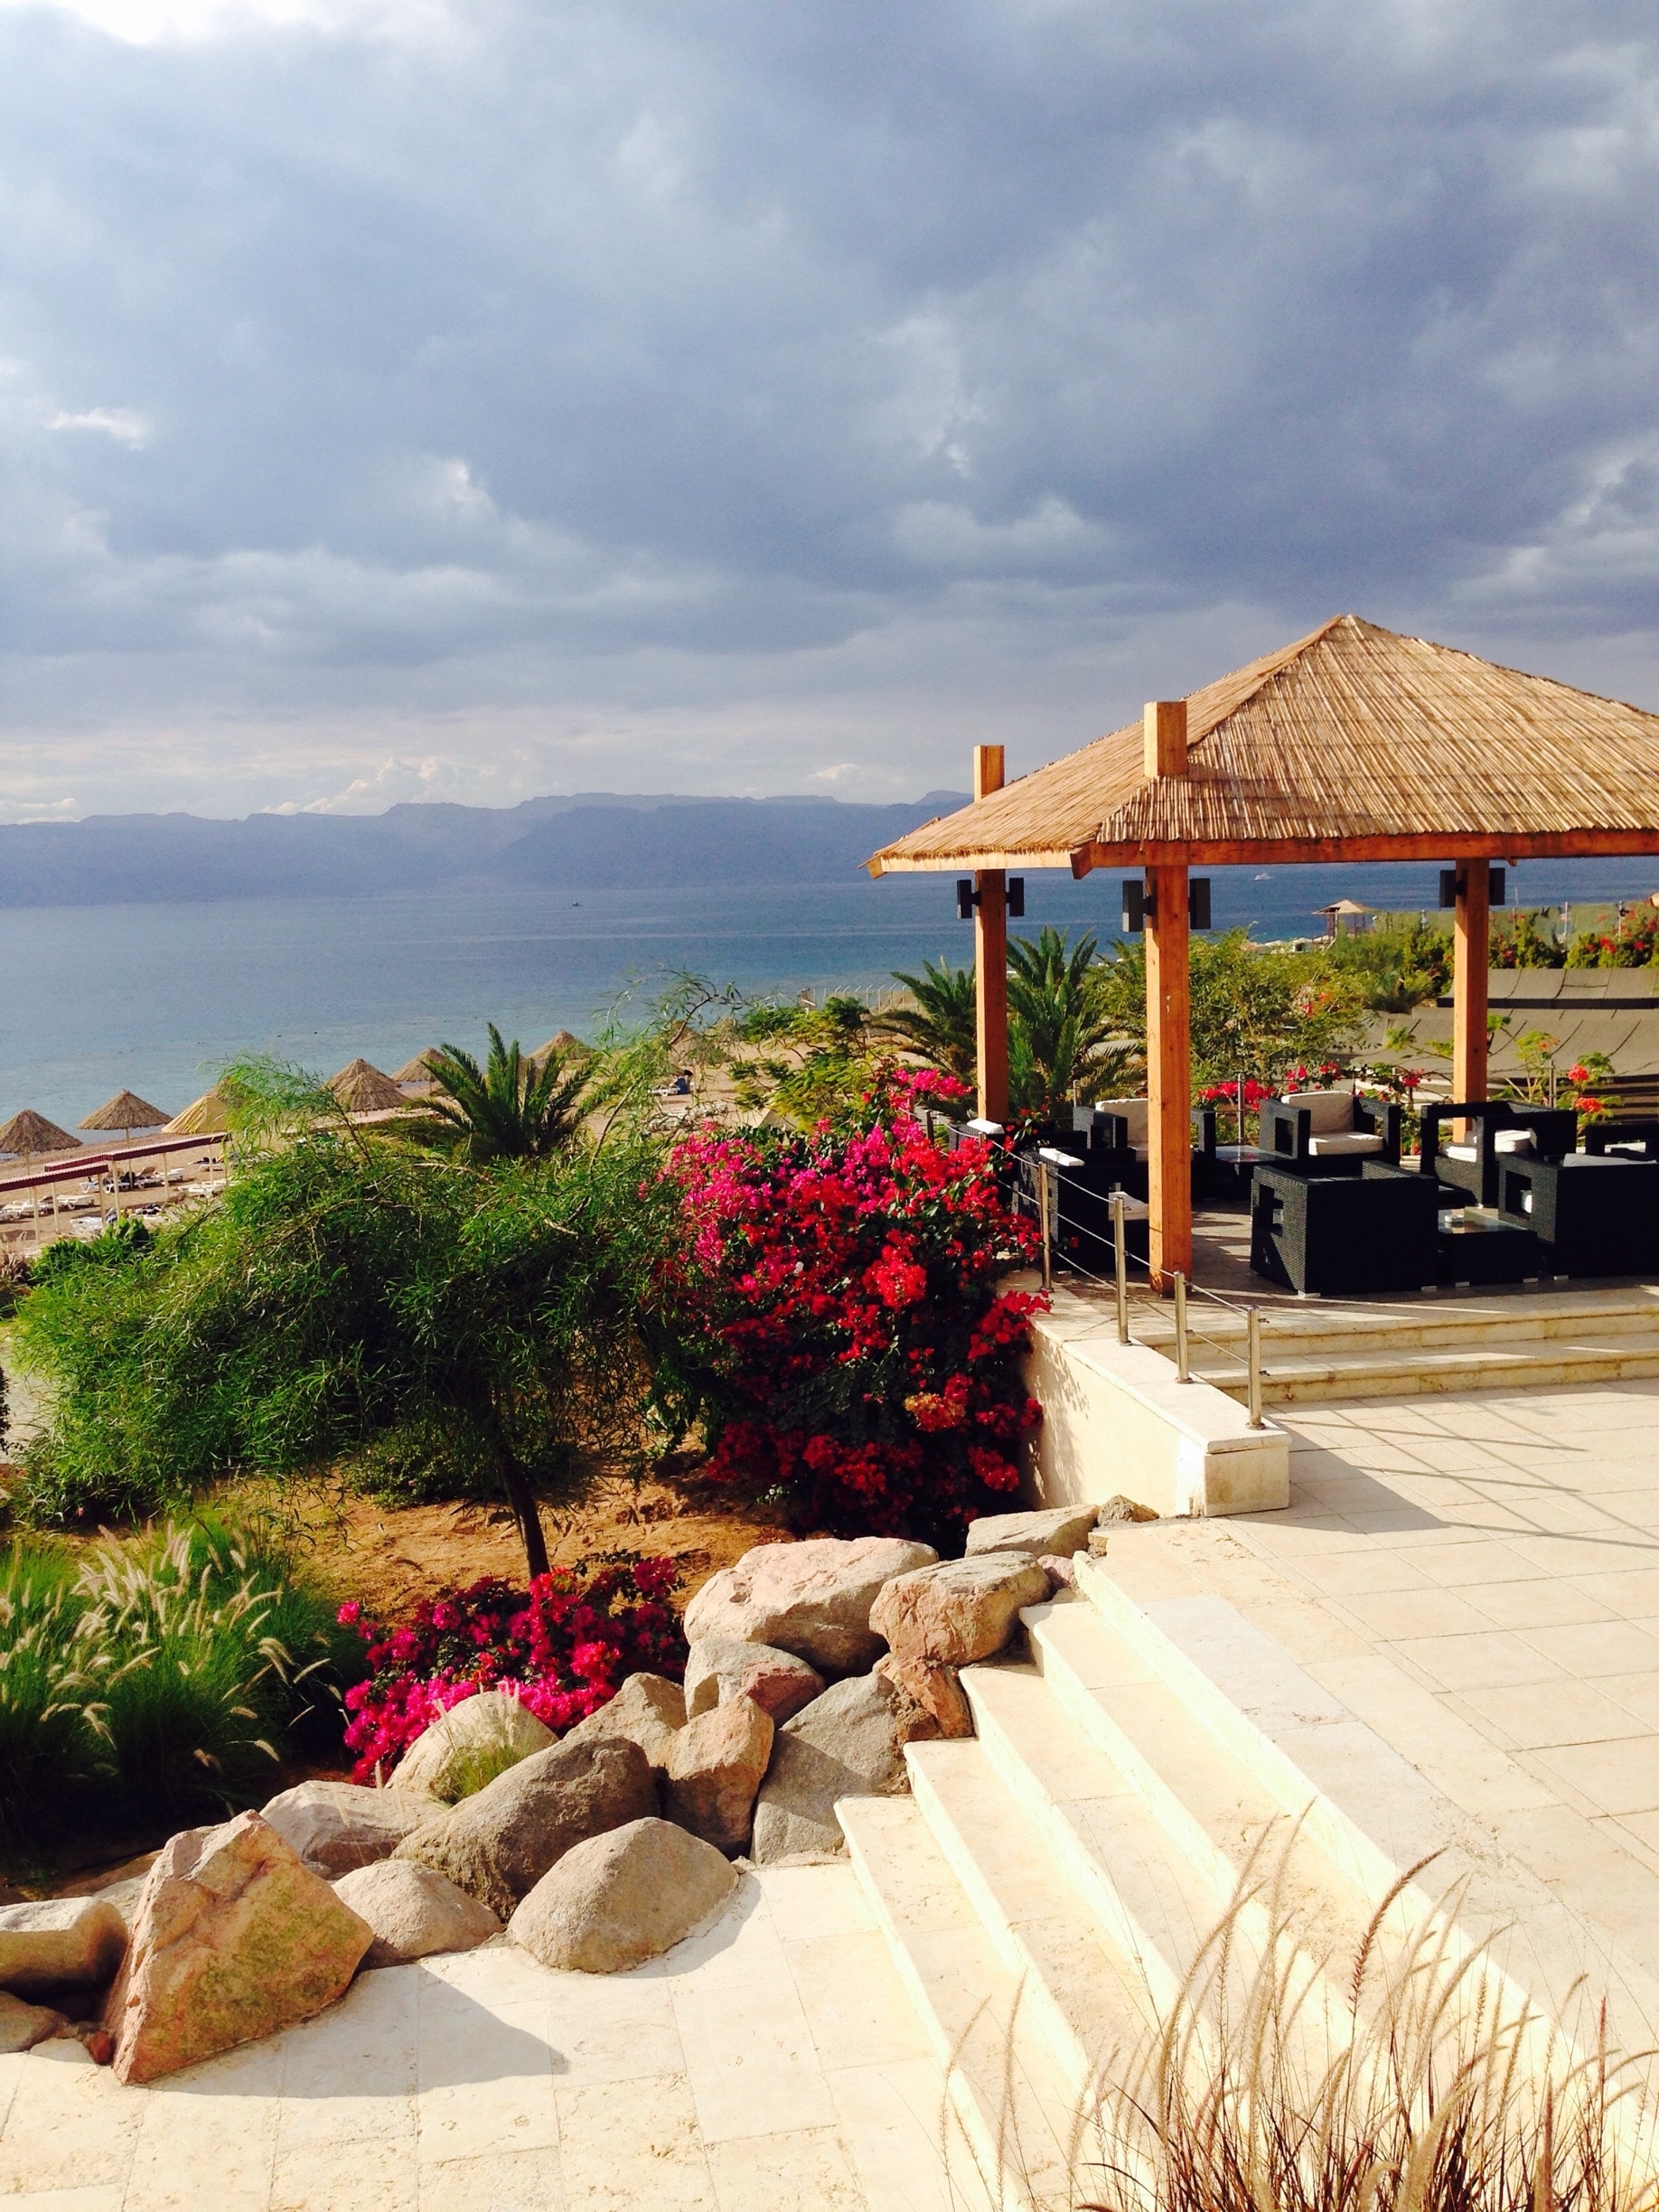 Beautiful private beach club in Aqaba. Women can't really swim at the public beaches so this was a welcome spot